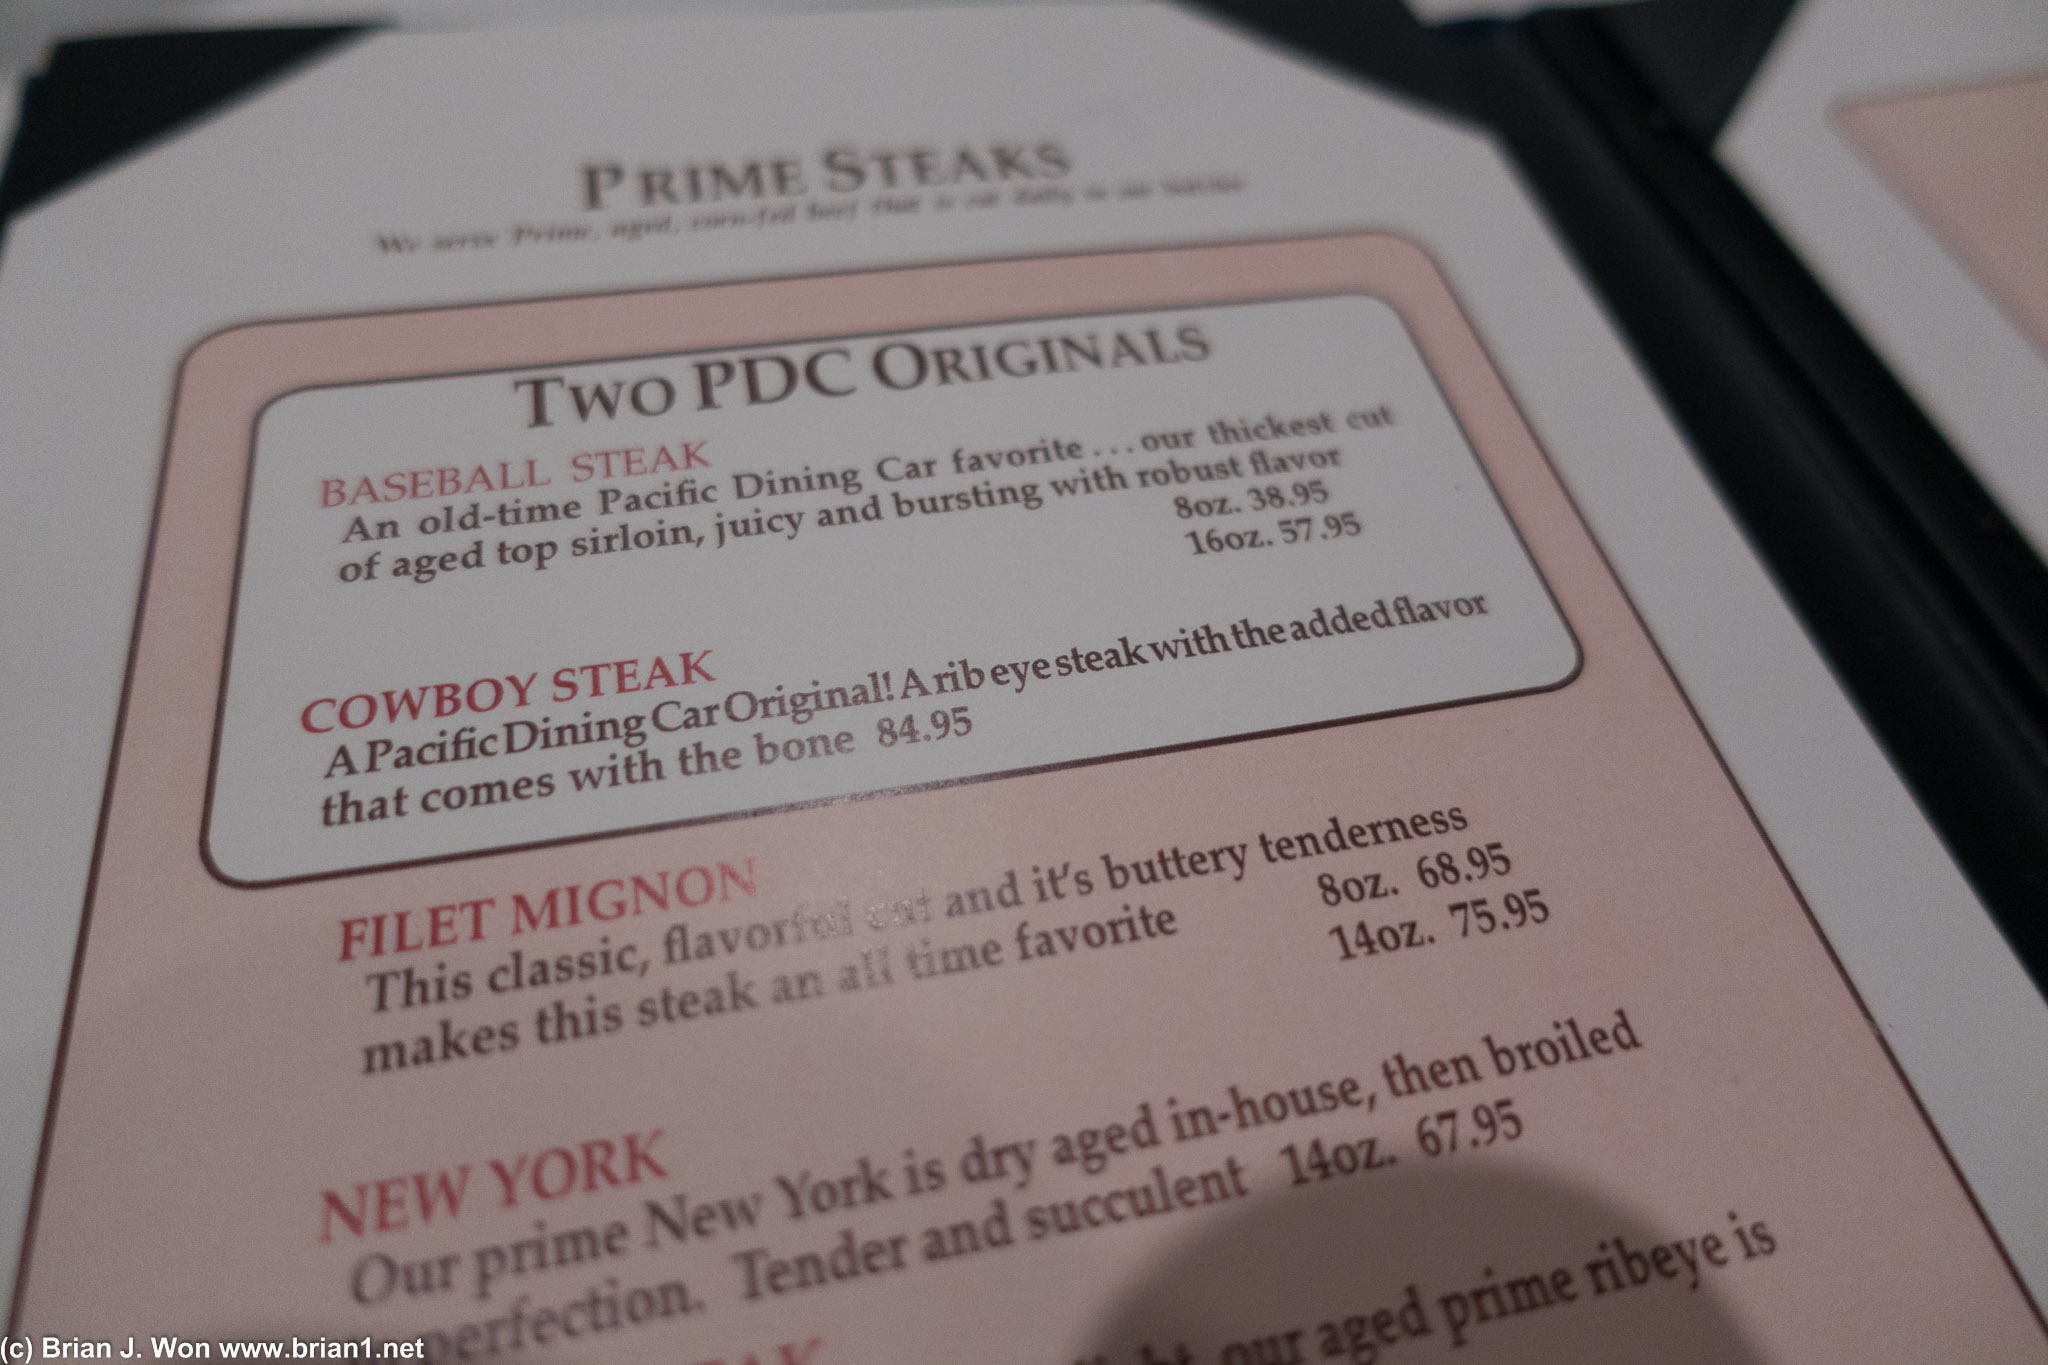 Instead of $38.95 for the baseball steak, we're here because it's $0.98.